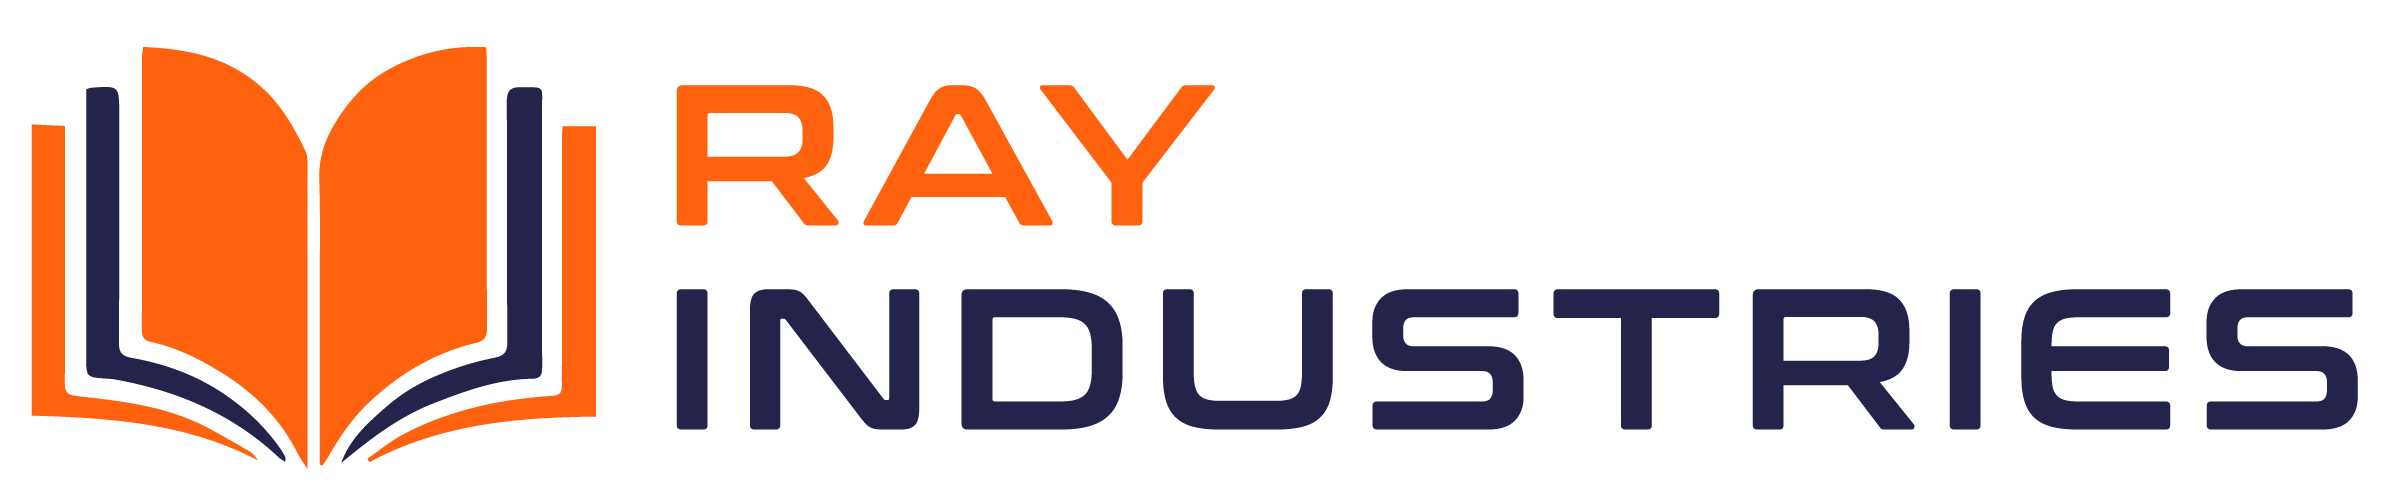 Ray industries